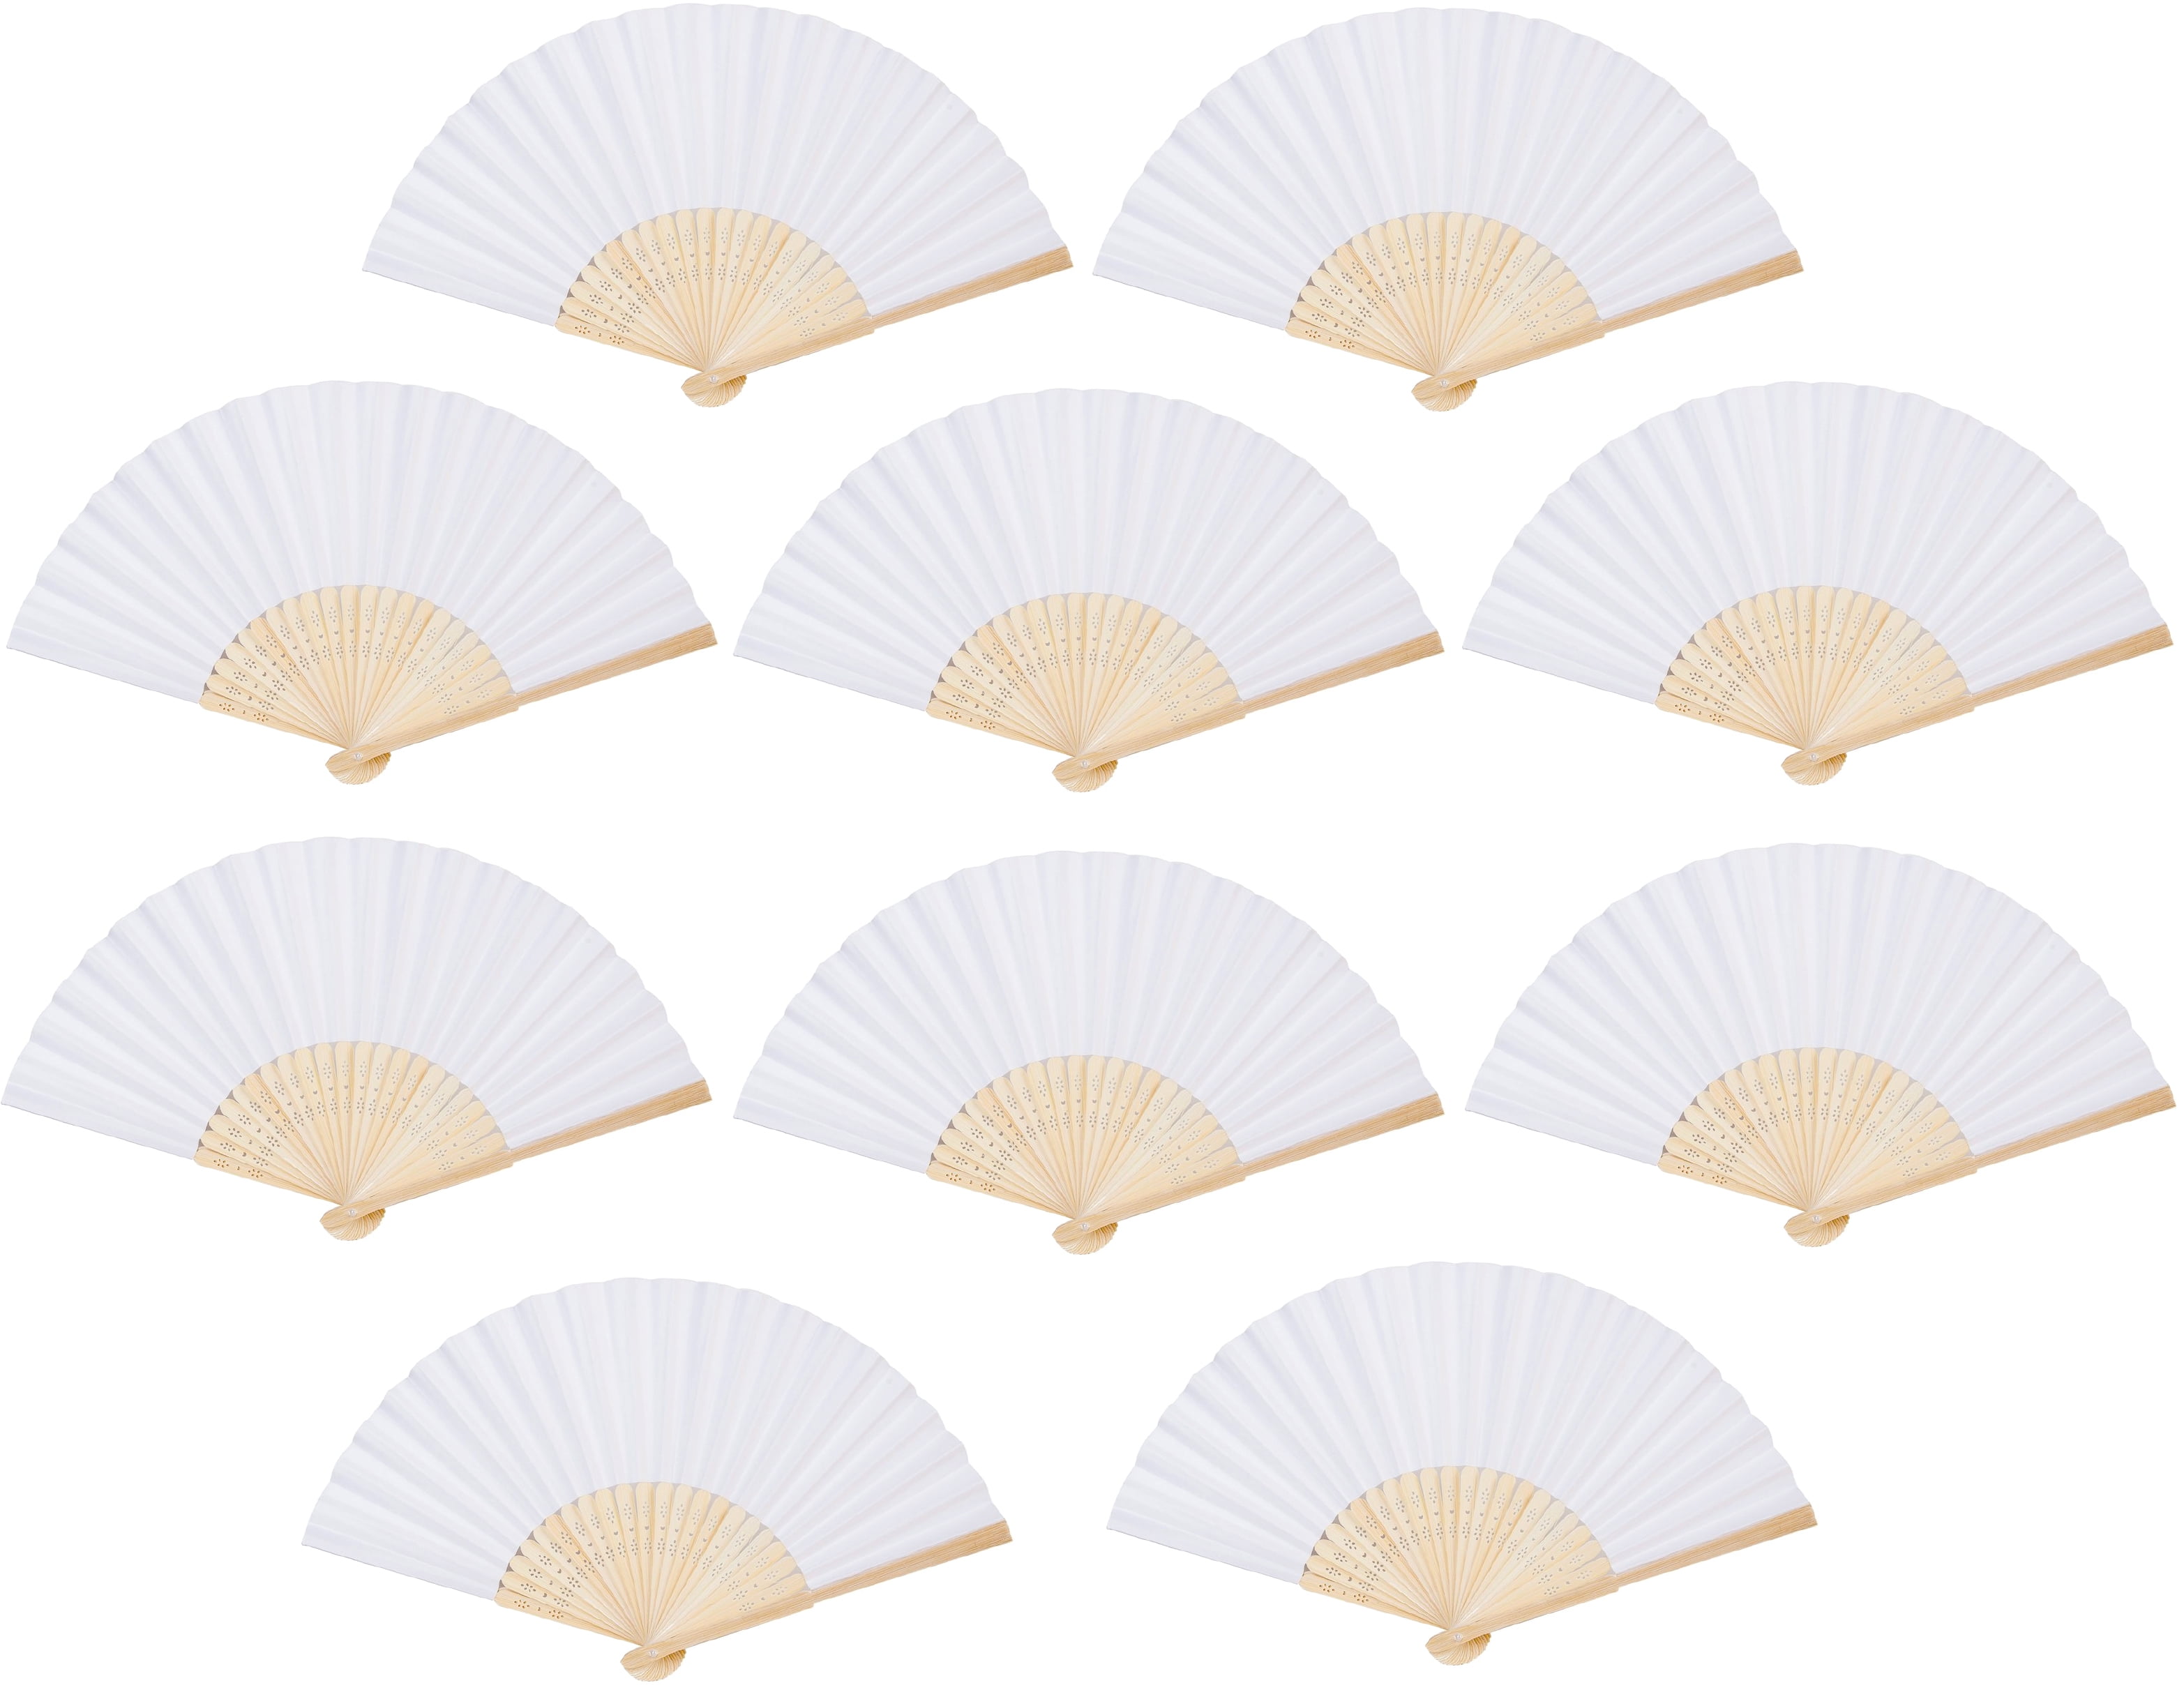 Chinese Bamboo Fan Folding Hand Paper Fans Decor Gift Summer Wedding Party Favor 